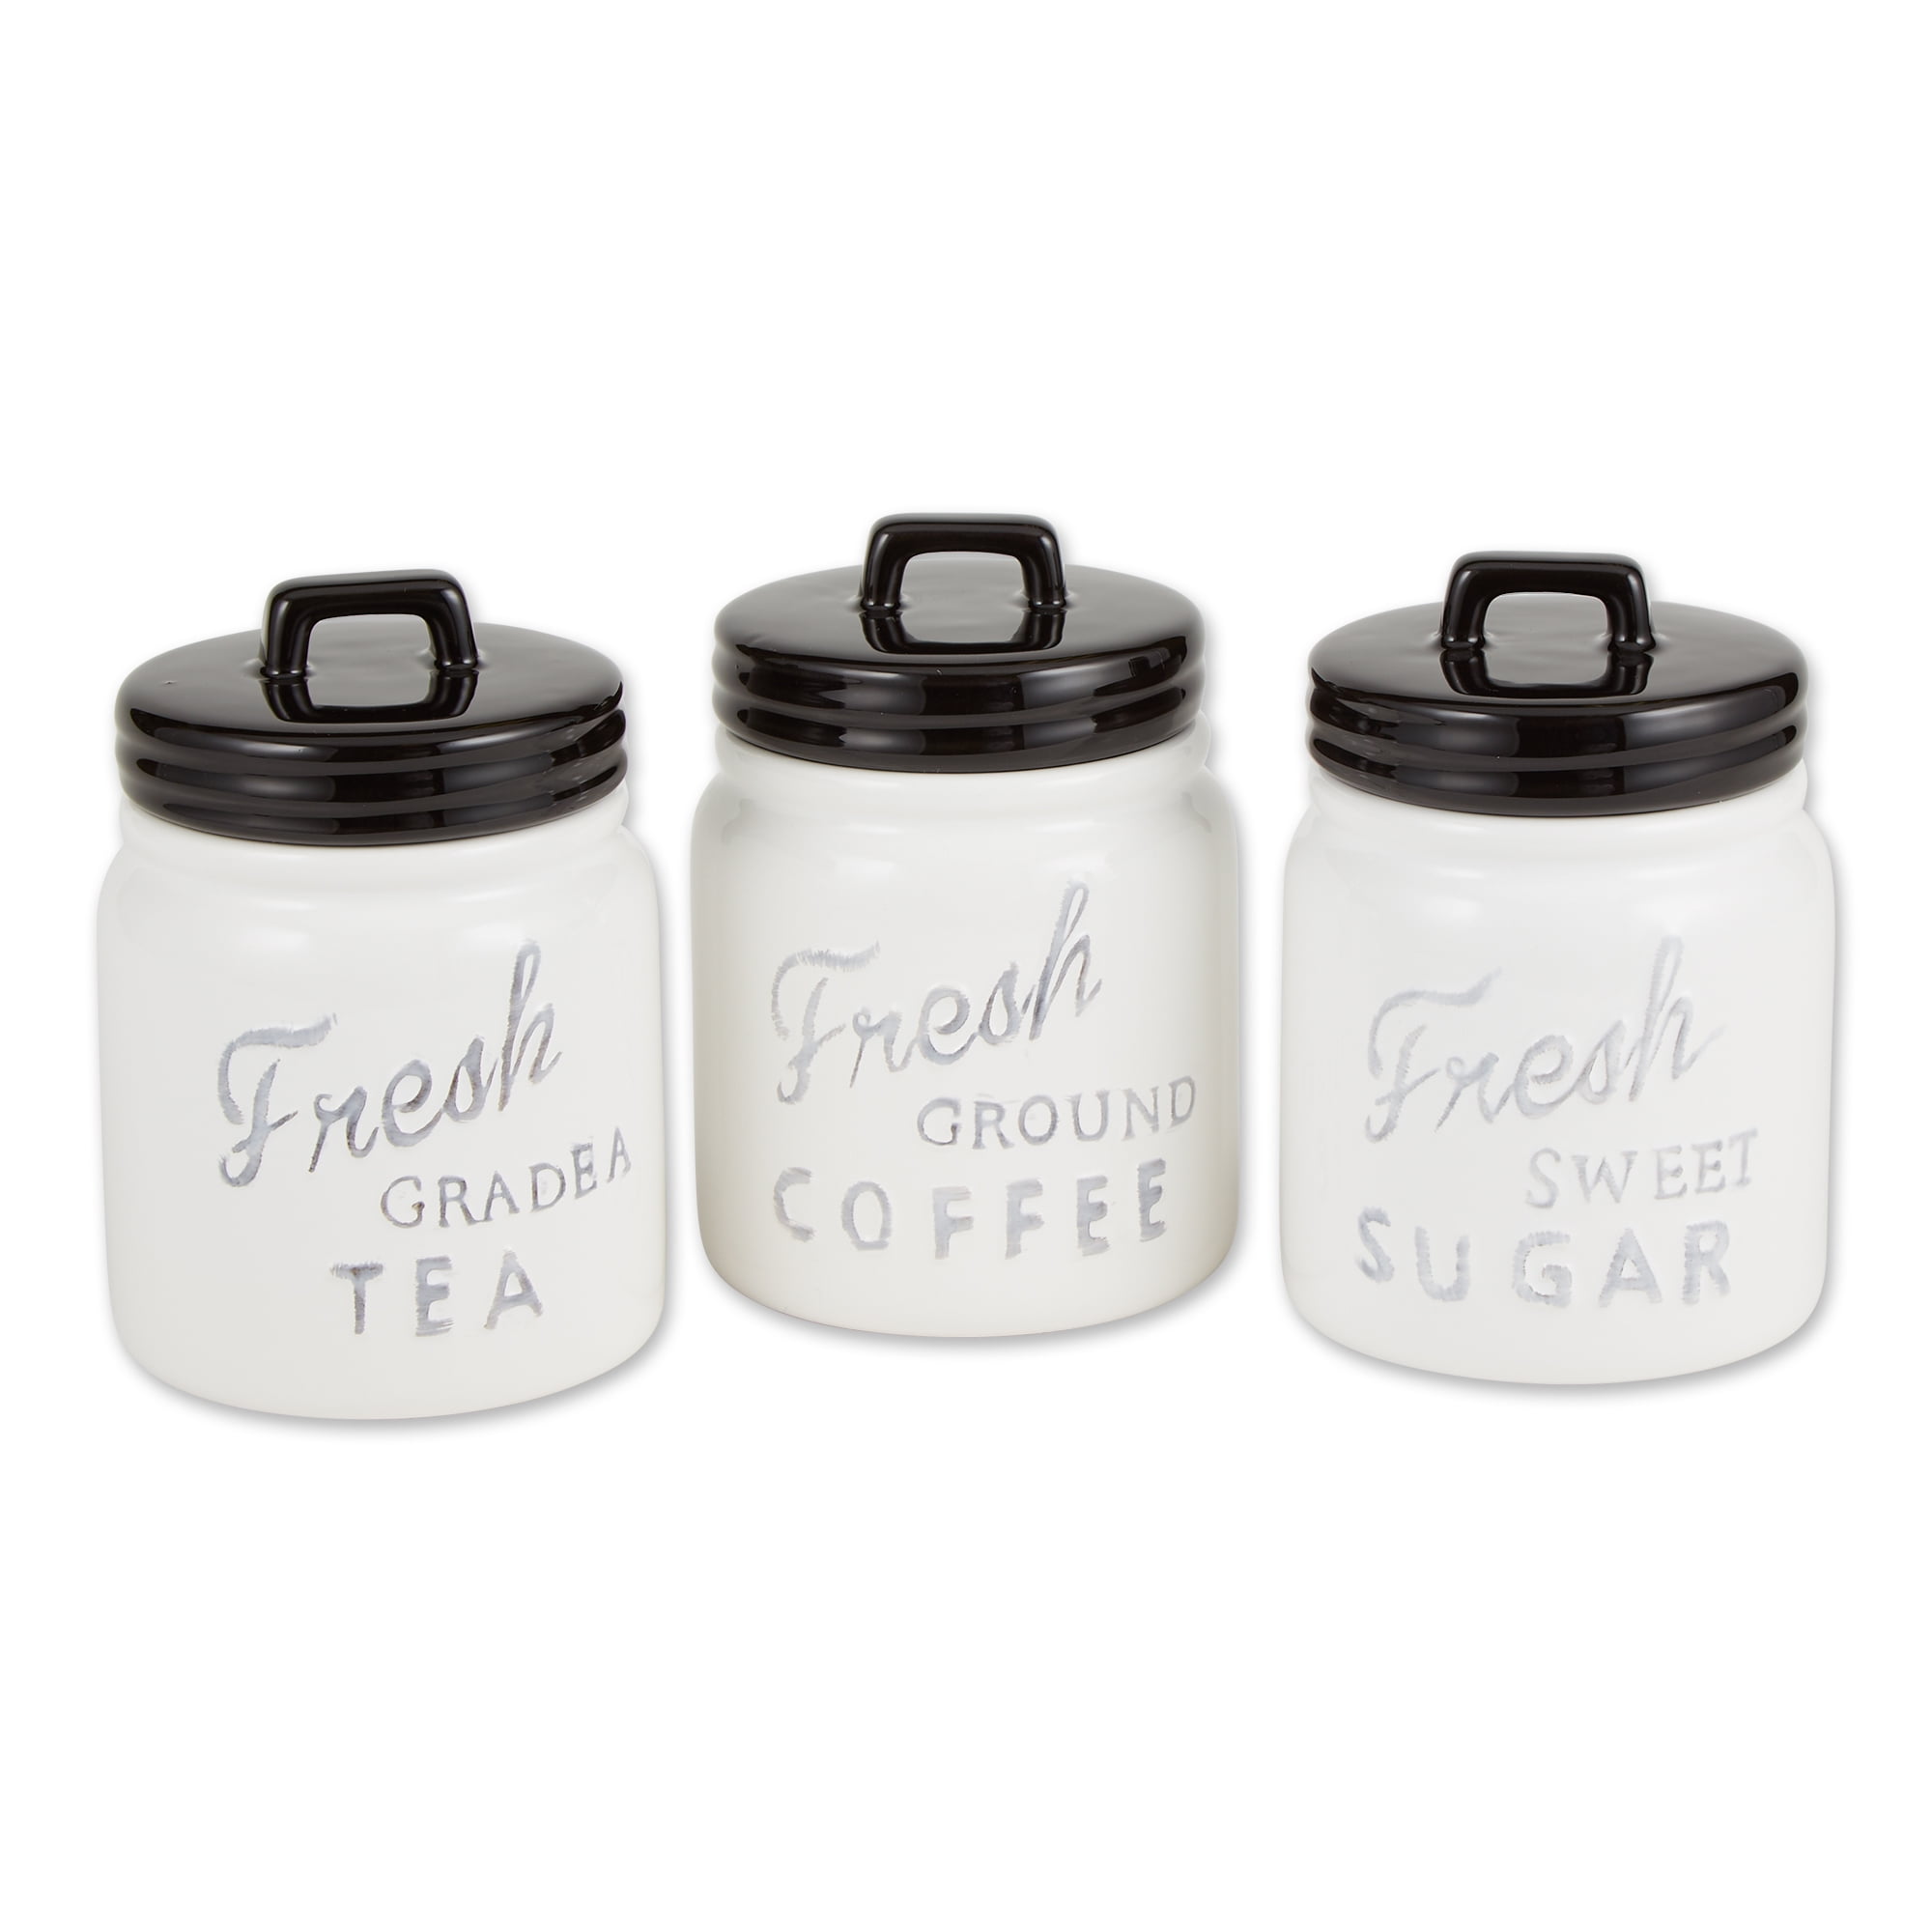 Set of 3 Ceramic White Marble Effect Tea Coffee Sugar Storage Jars/Canisters with Wooden Lids